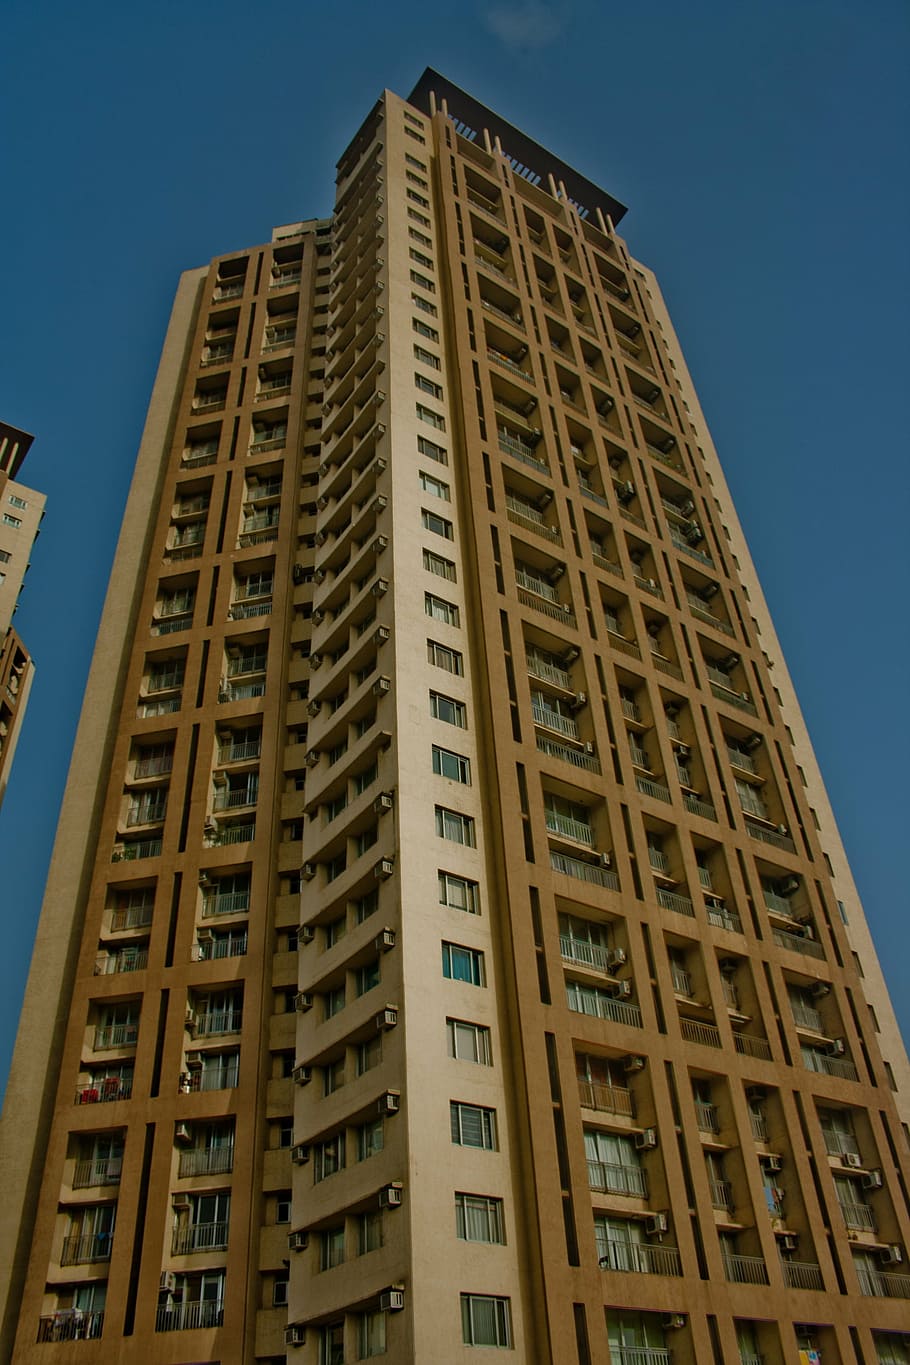 tower, building, tall, high, mumbai, india, architecture, city, building exterior, low angle view